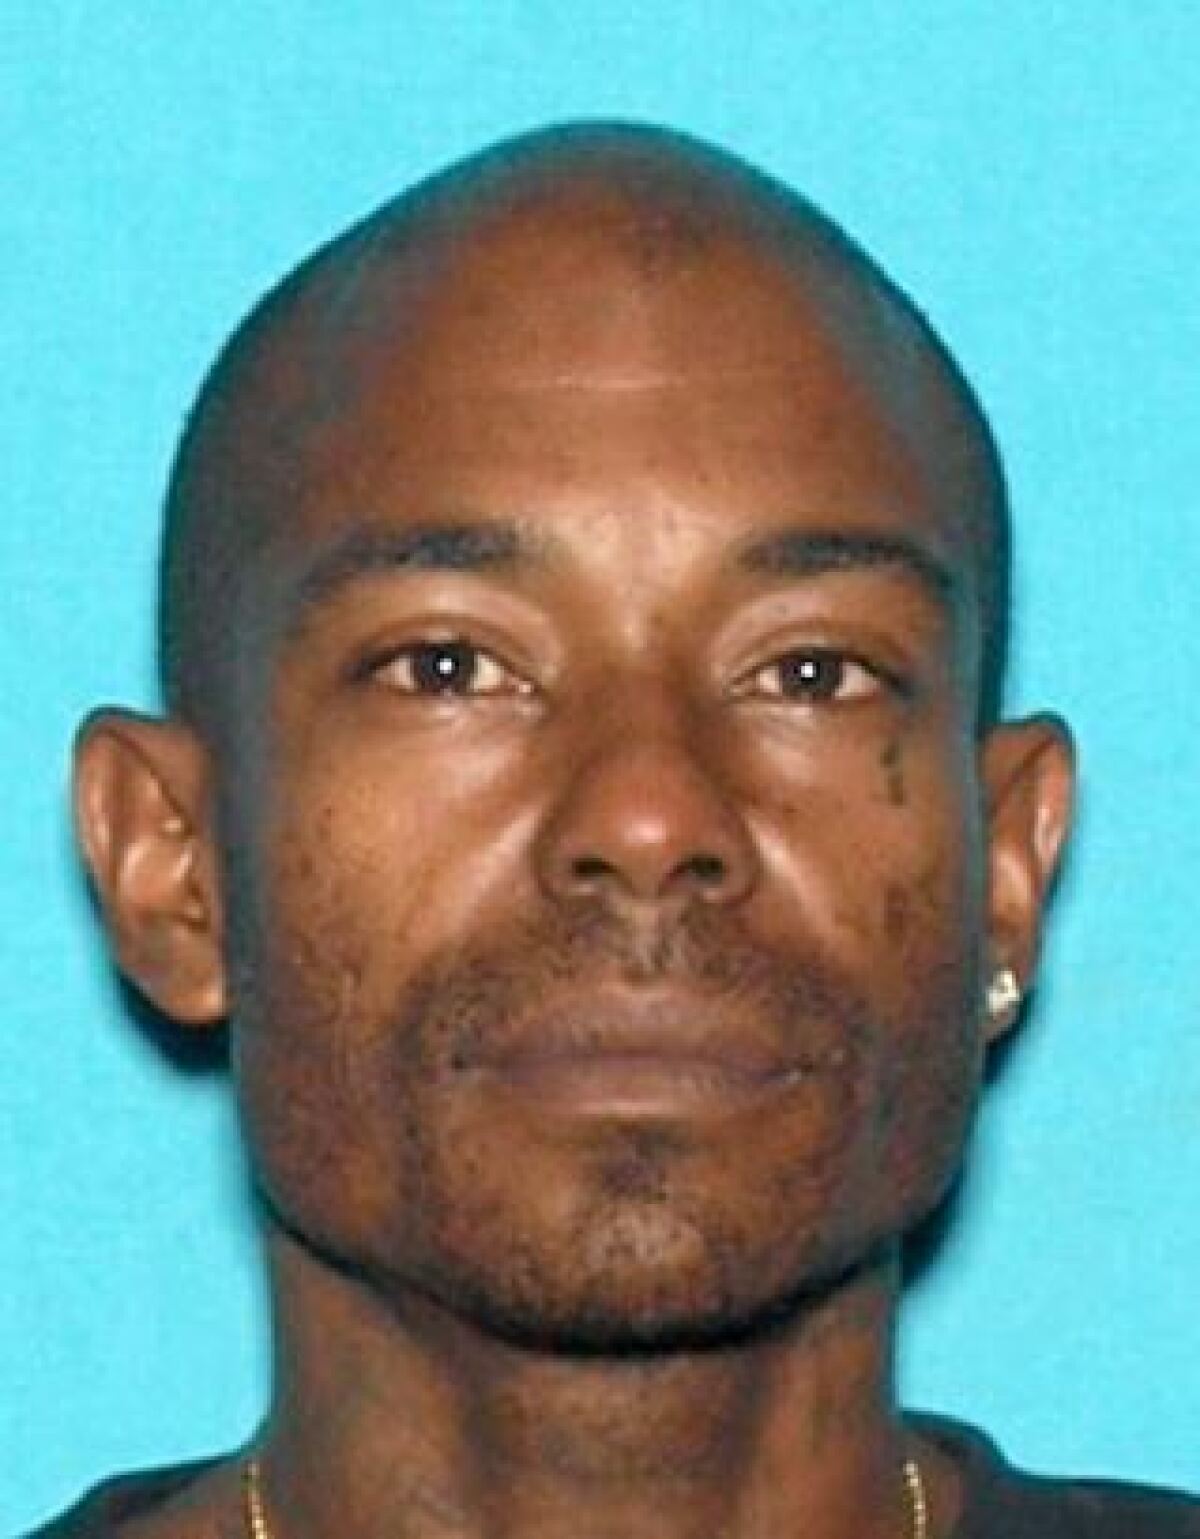 Celestine Stoot Jr., 31, suspect in the disappearance of a 1-year-old boy in Riverside.